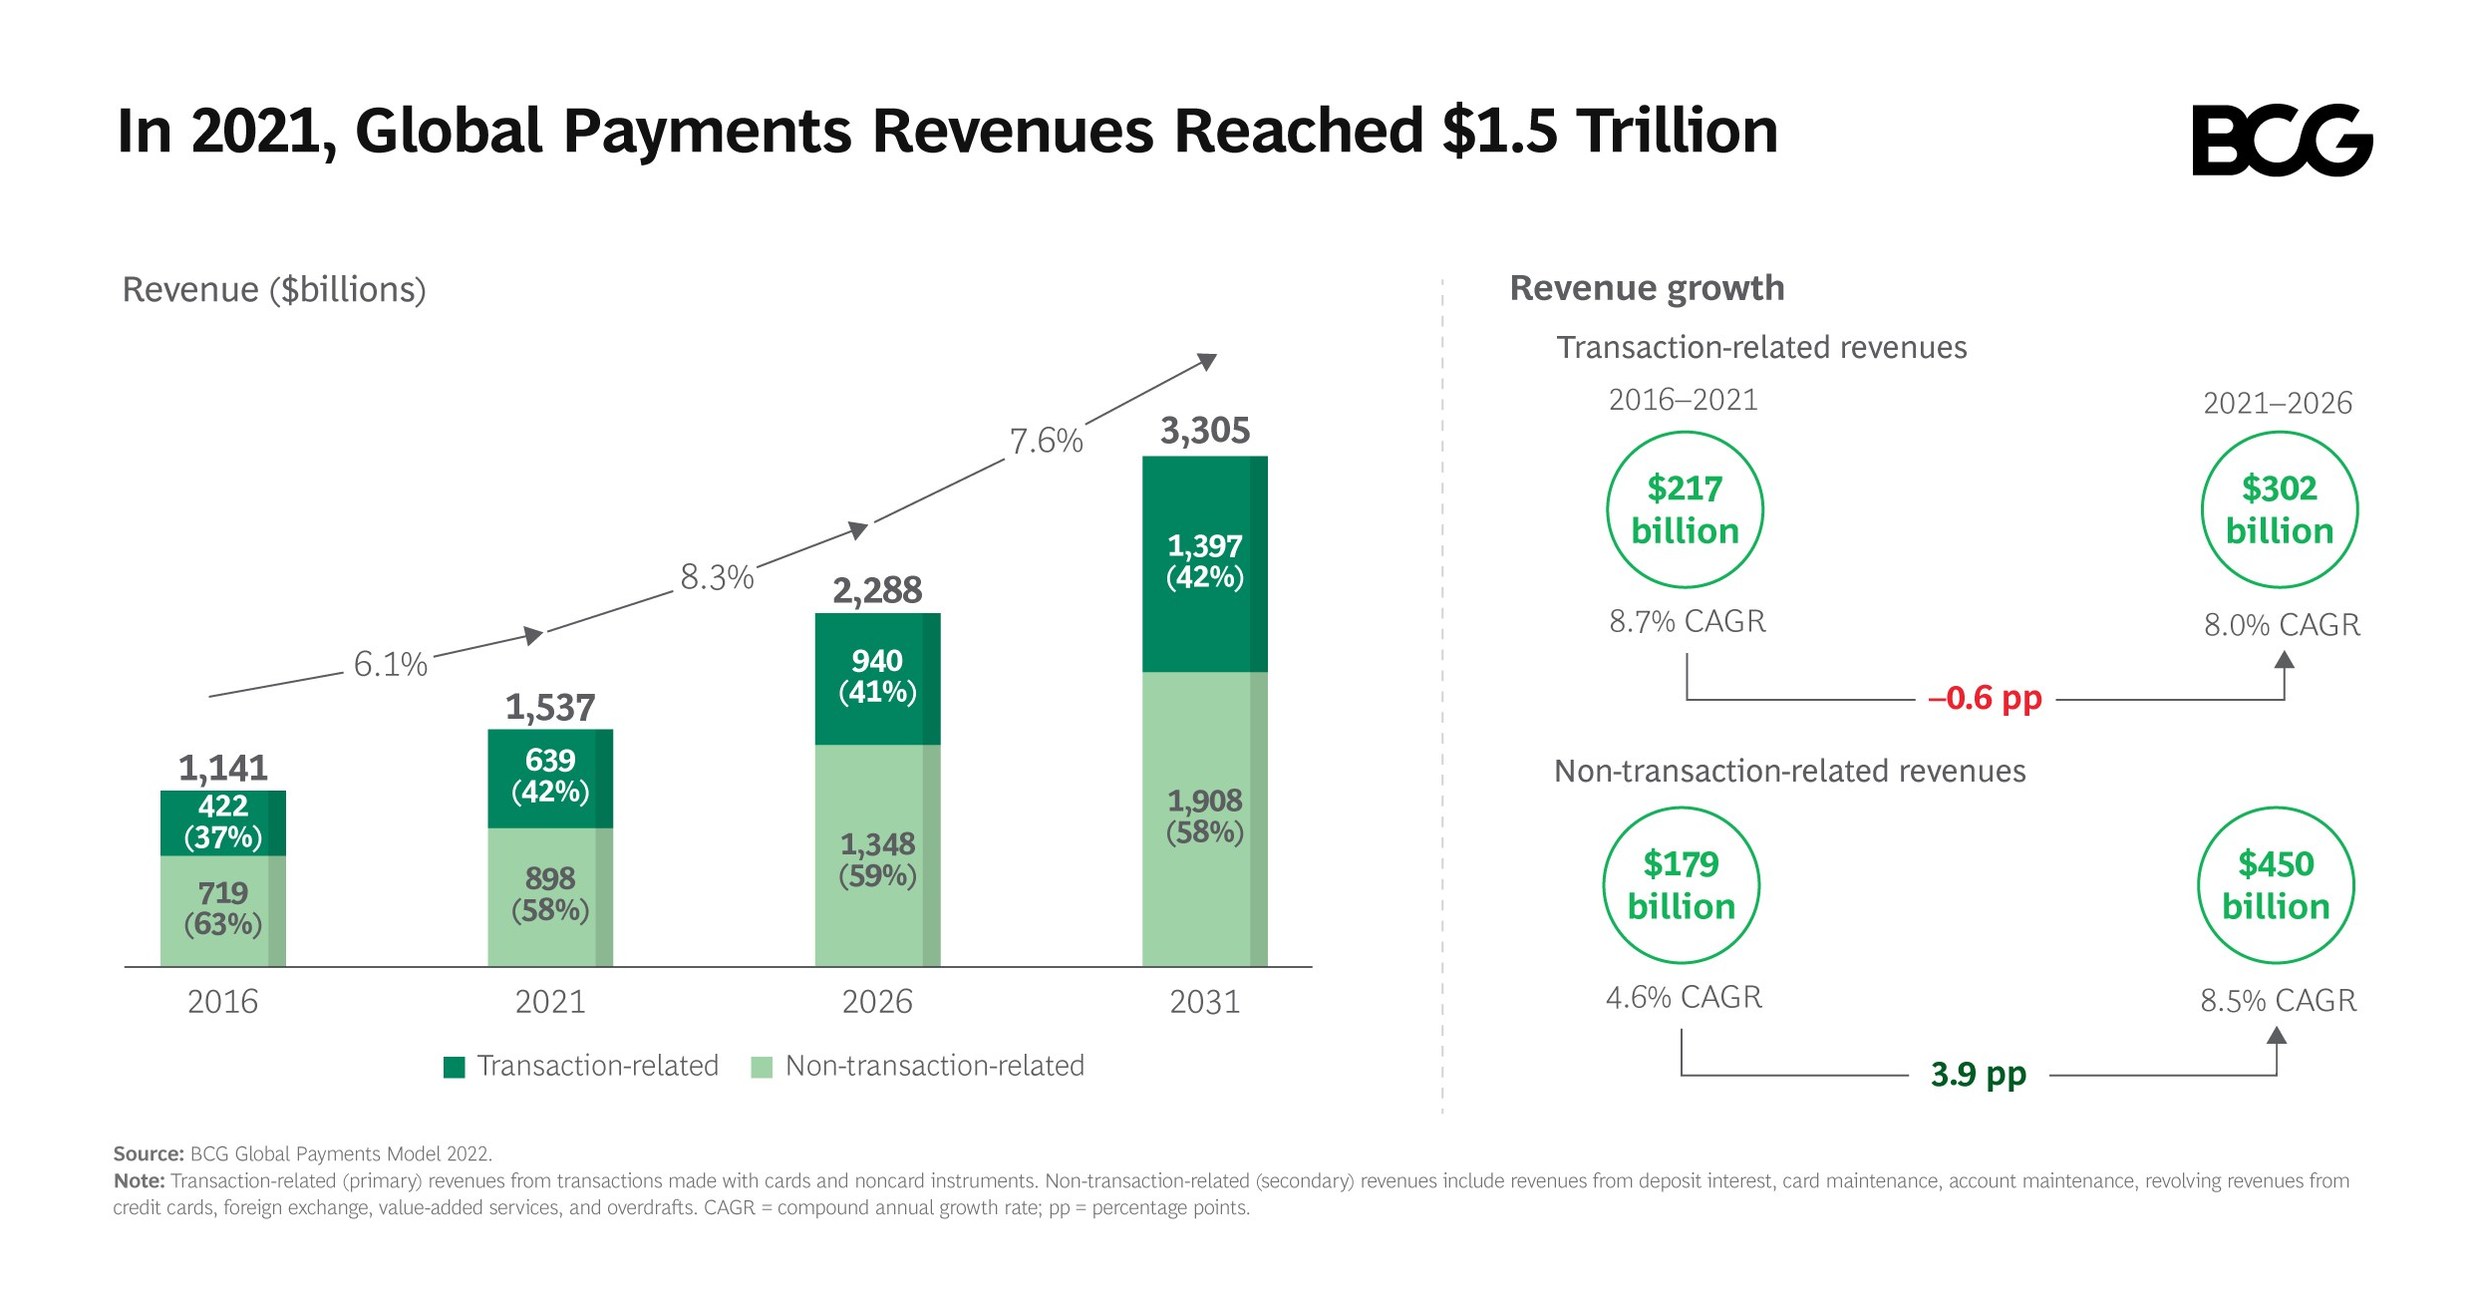 Global Payments Revenues Are Expected to Reach 3.3 Trillion By 2031